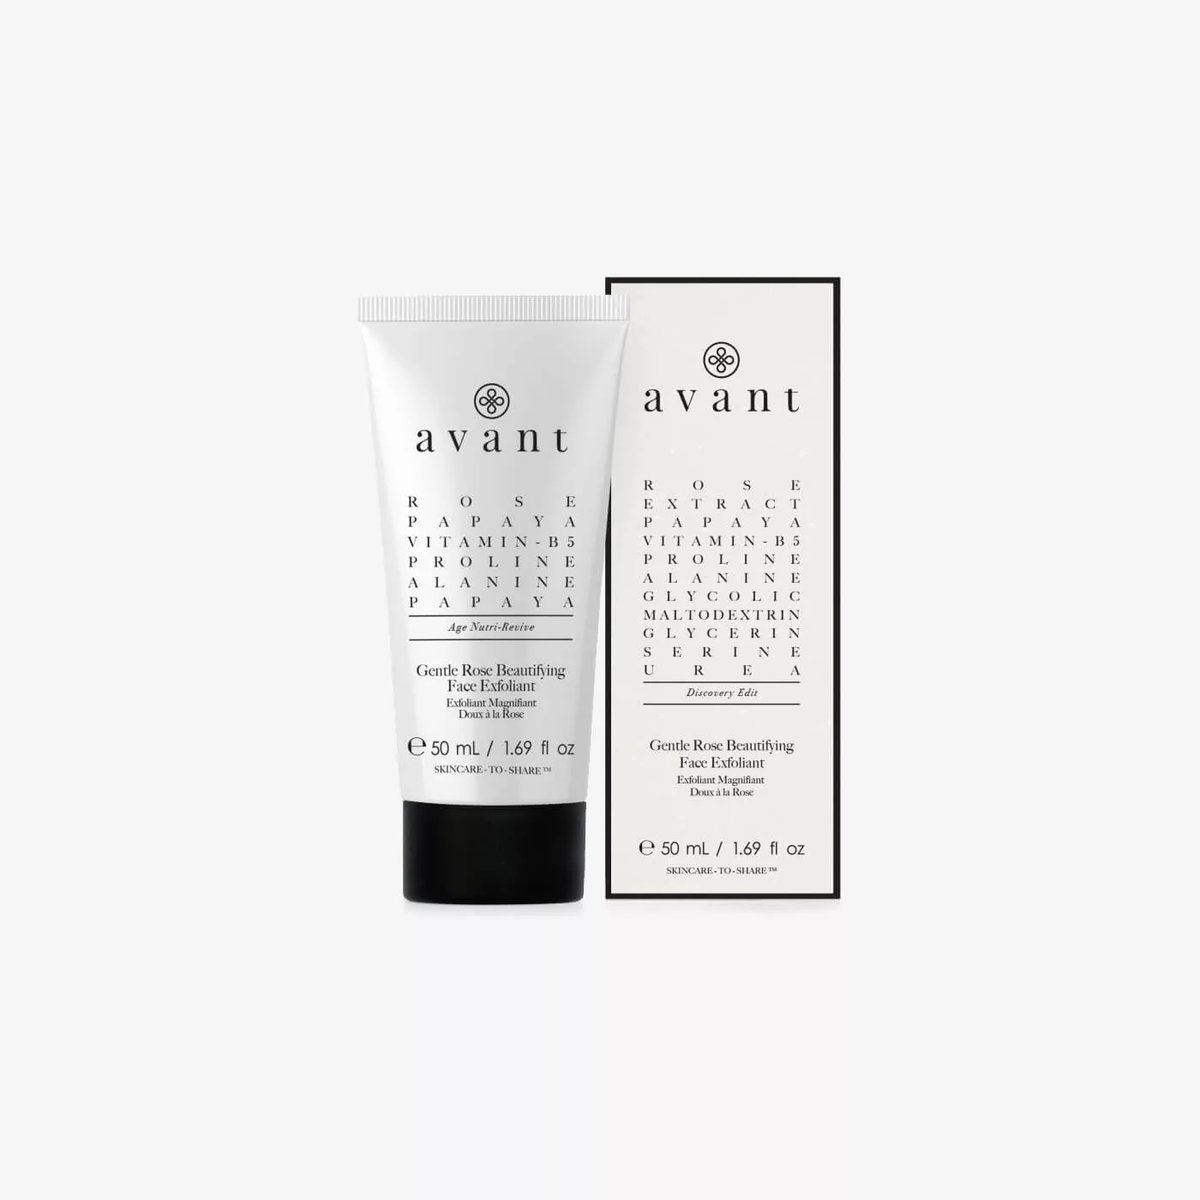 Discovery Edit - Prestige Gentle Rose Beautifying Face Exfoliant.1